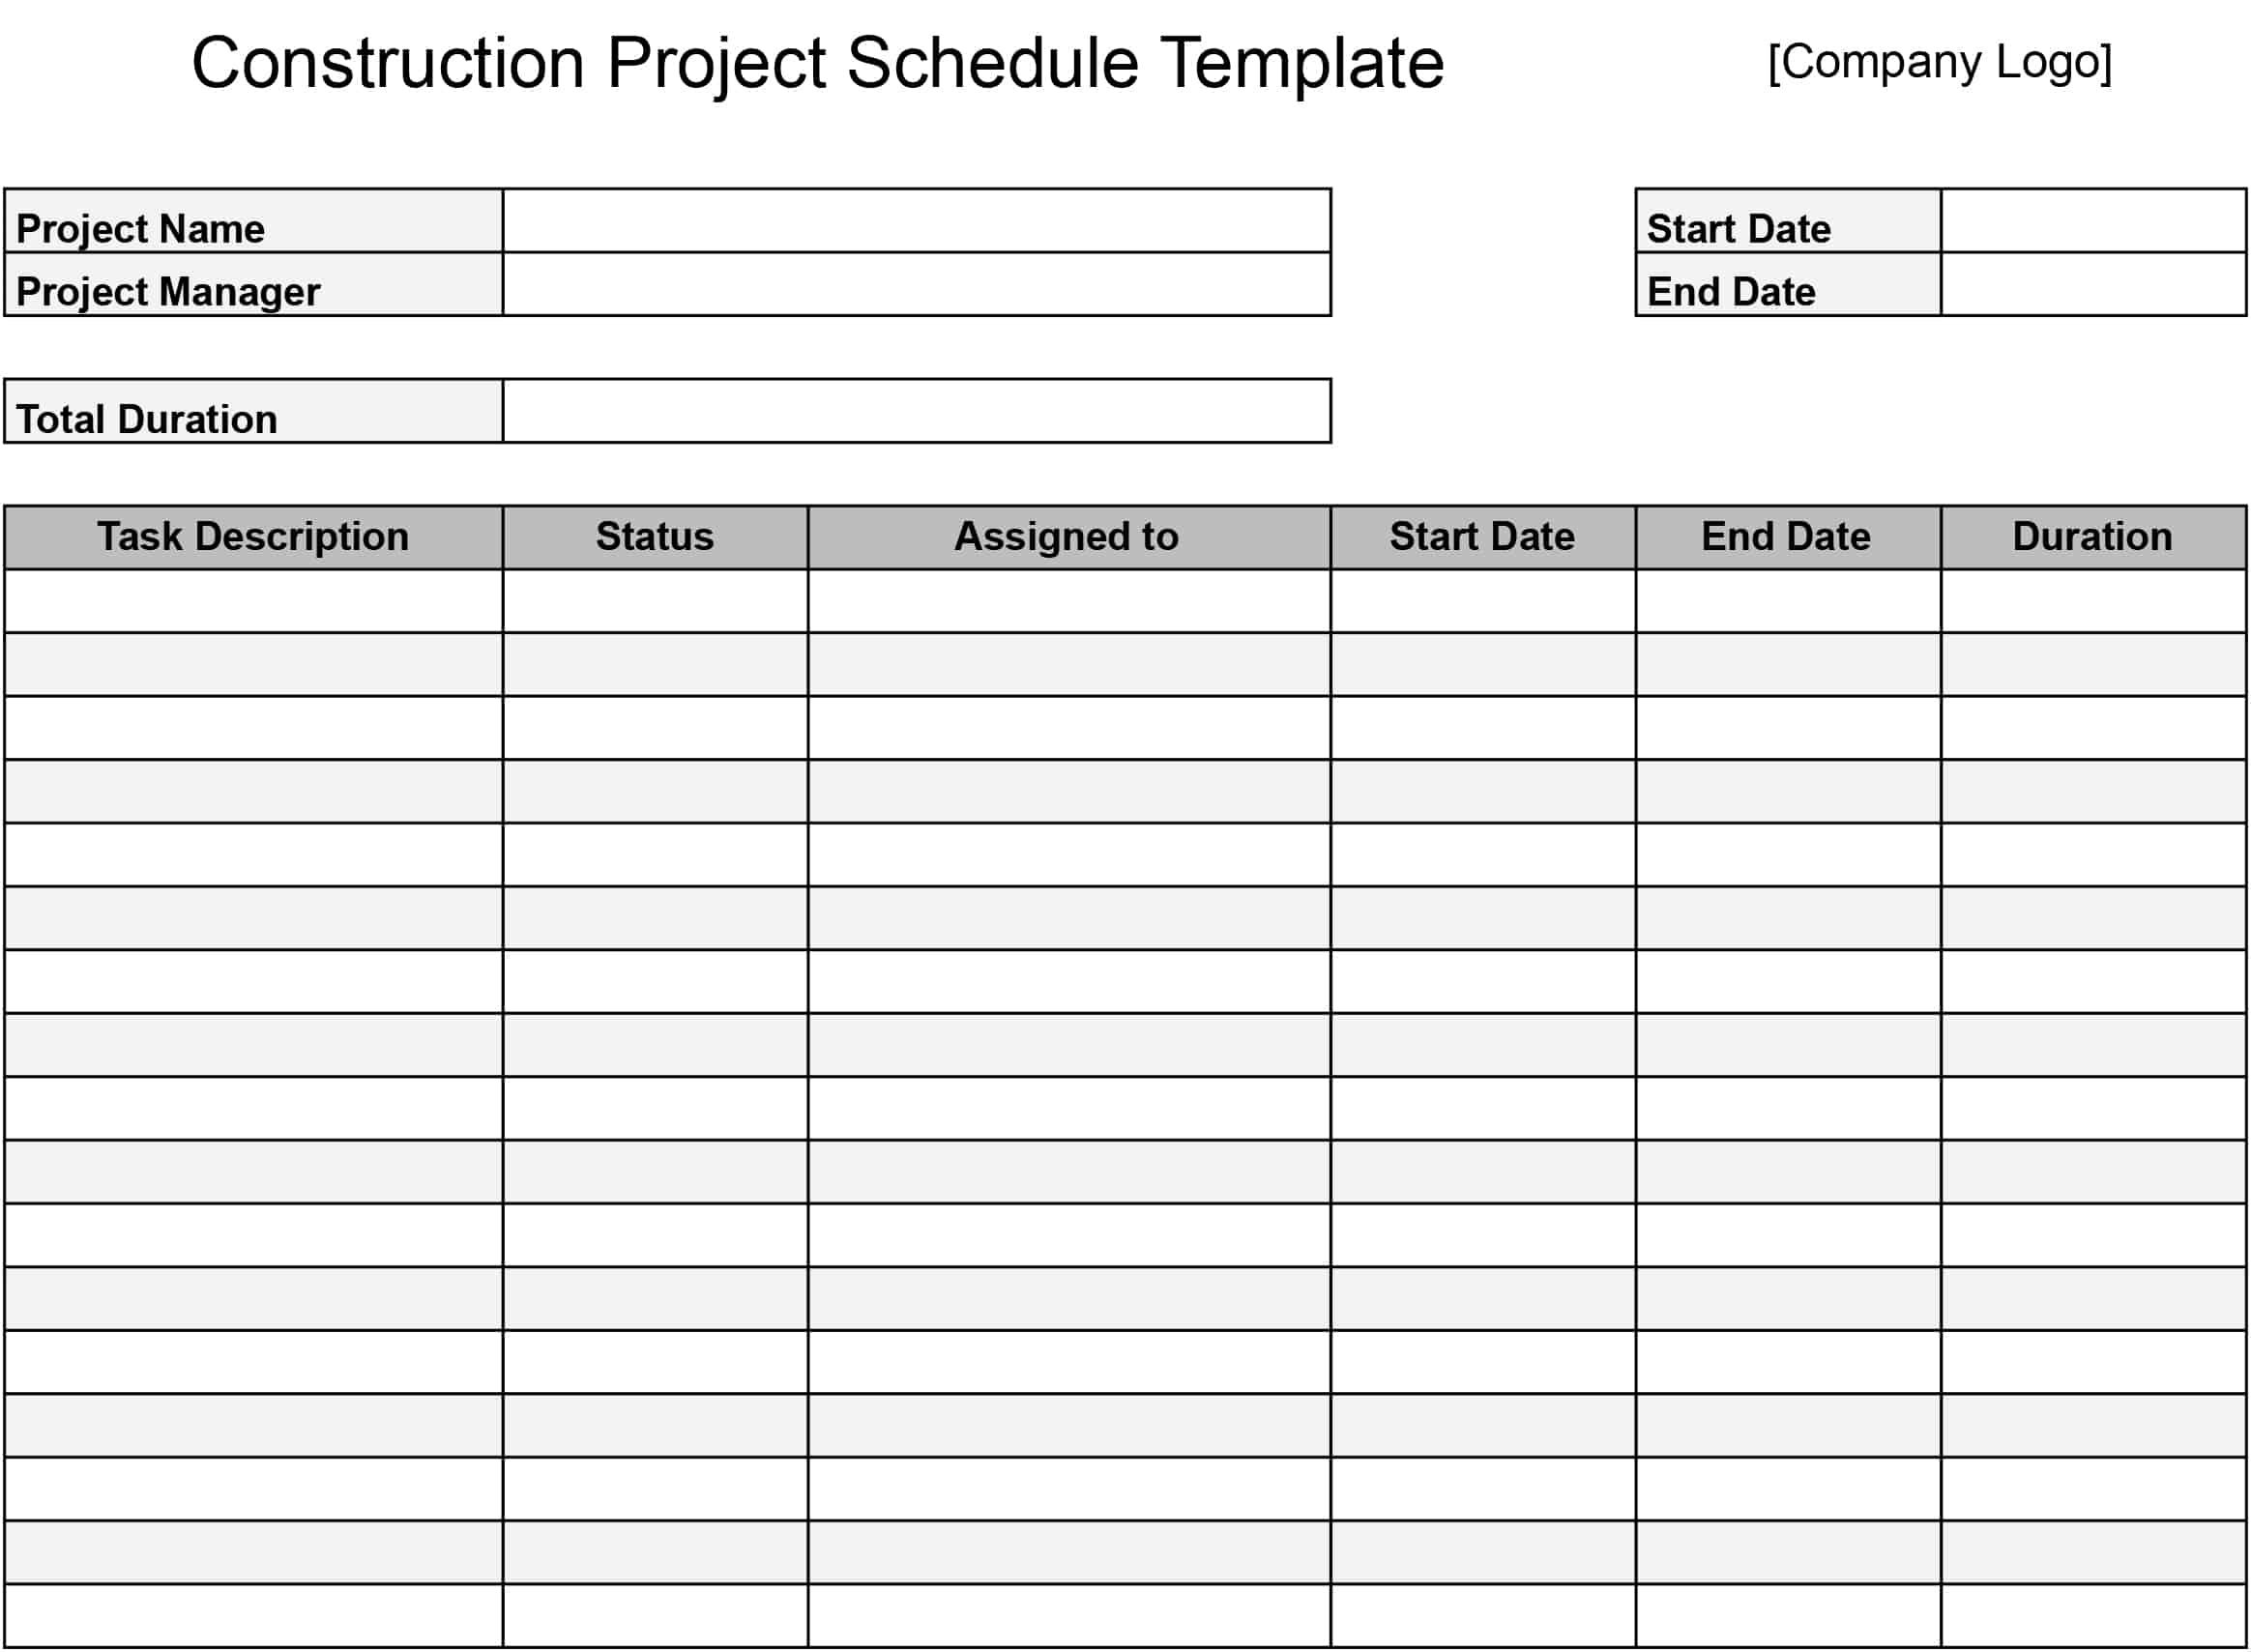 Construction Schedule Templates: Download Print for Free